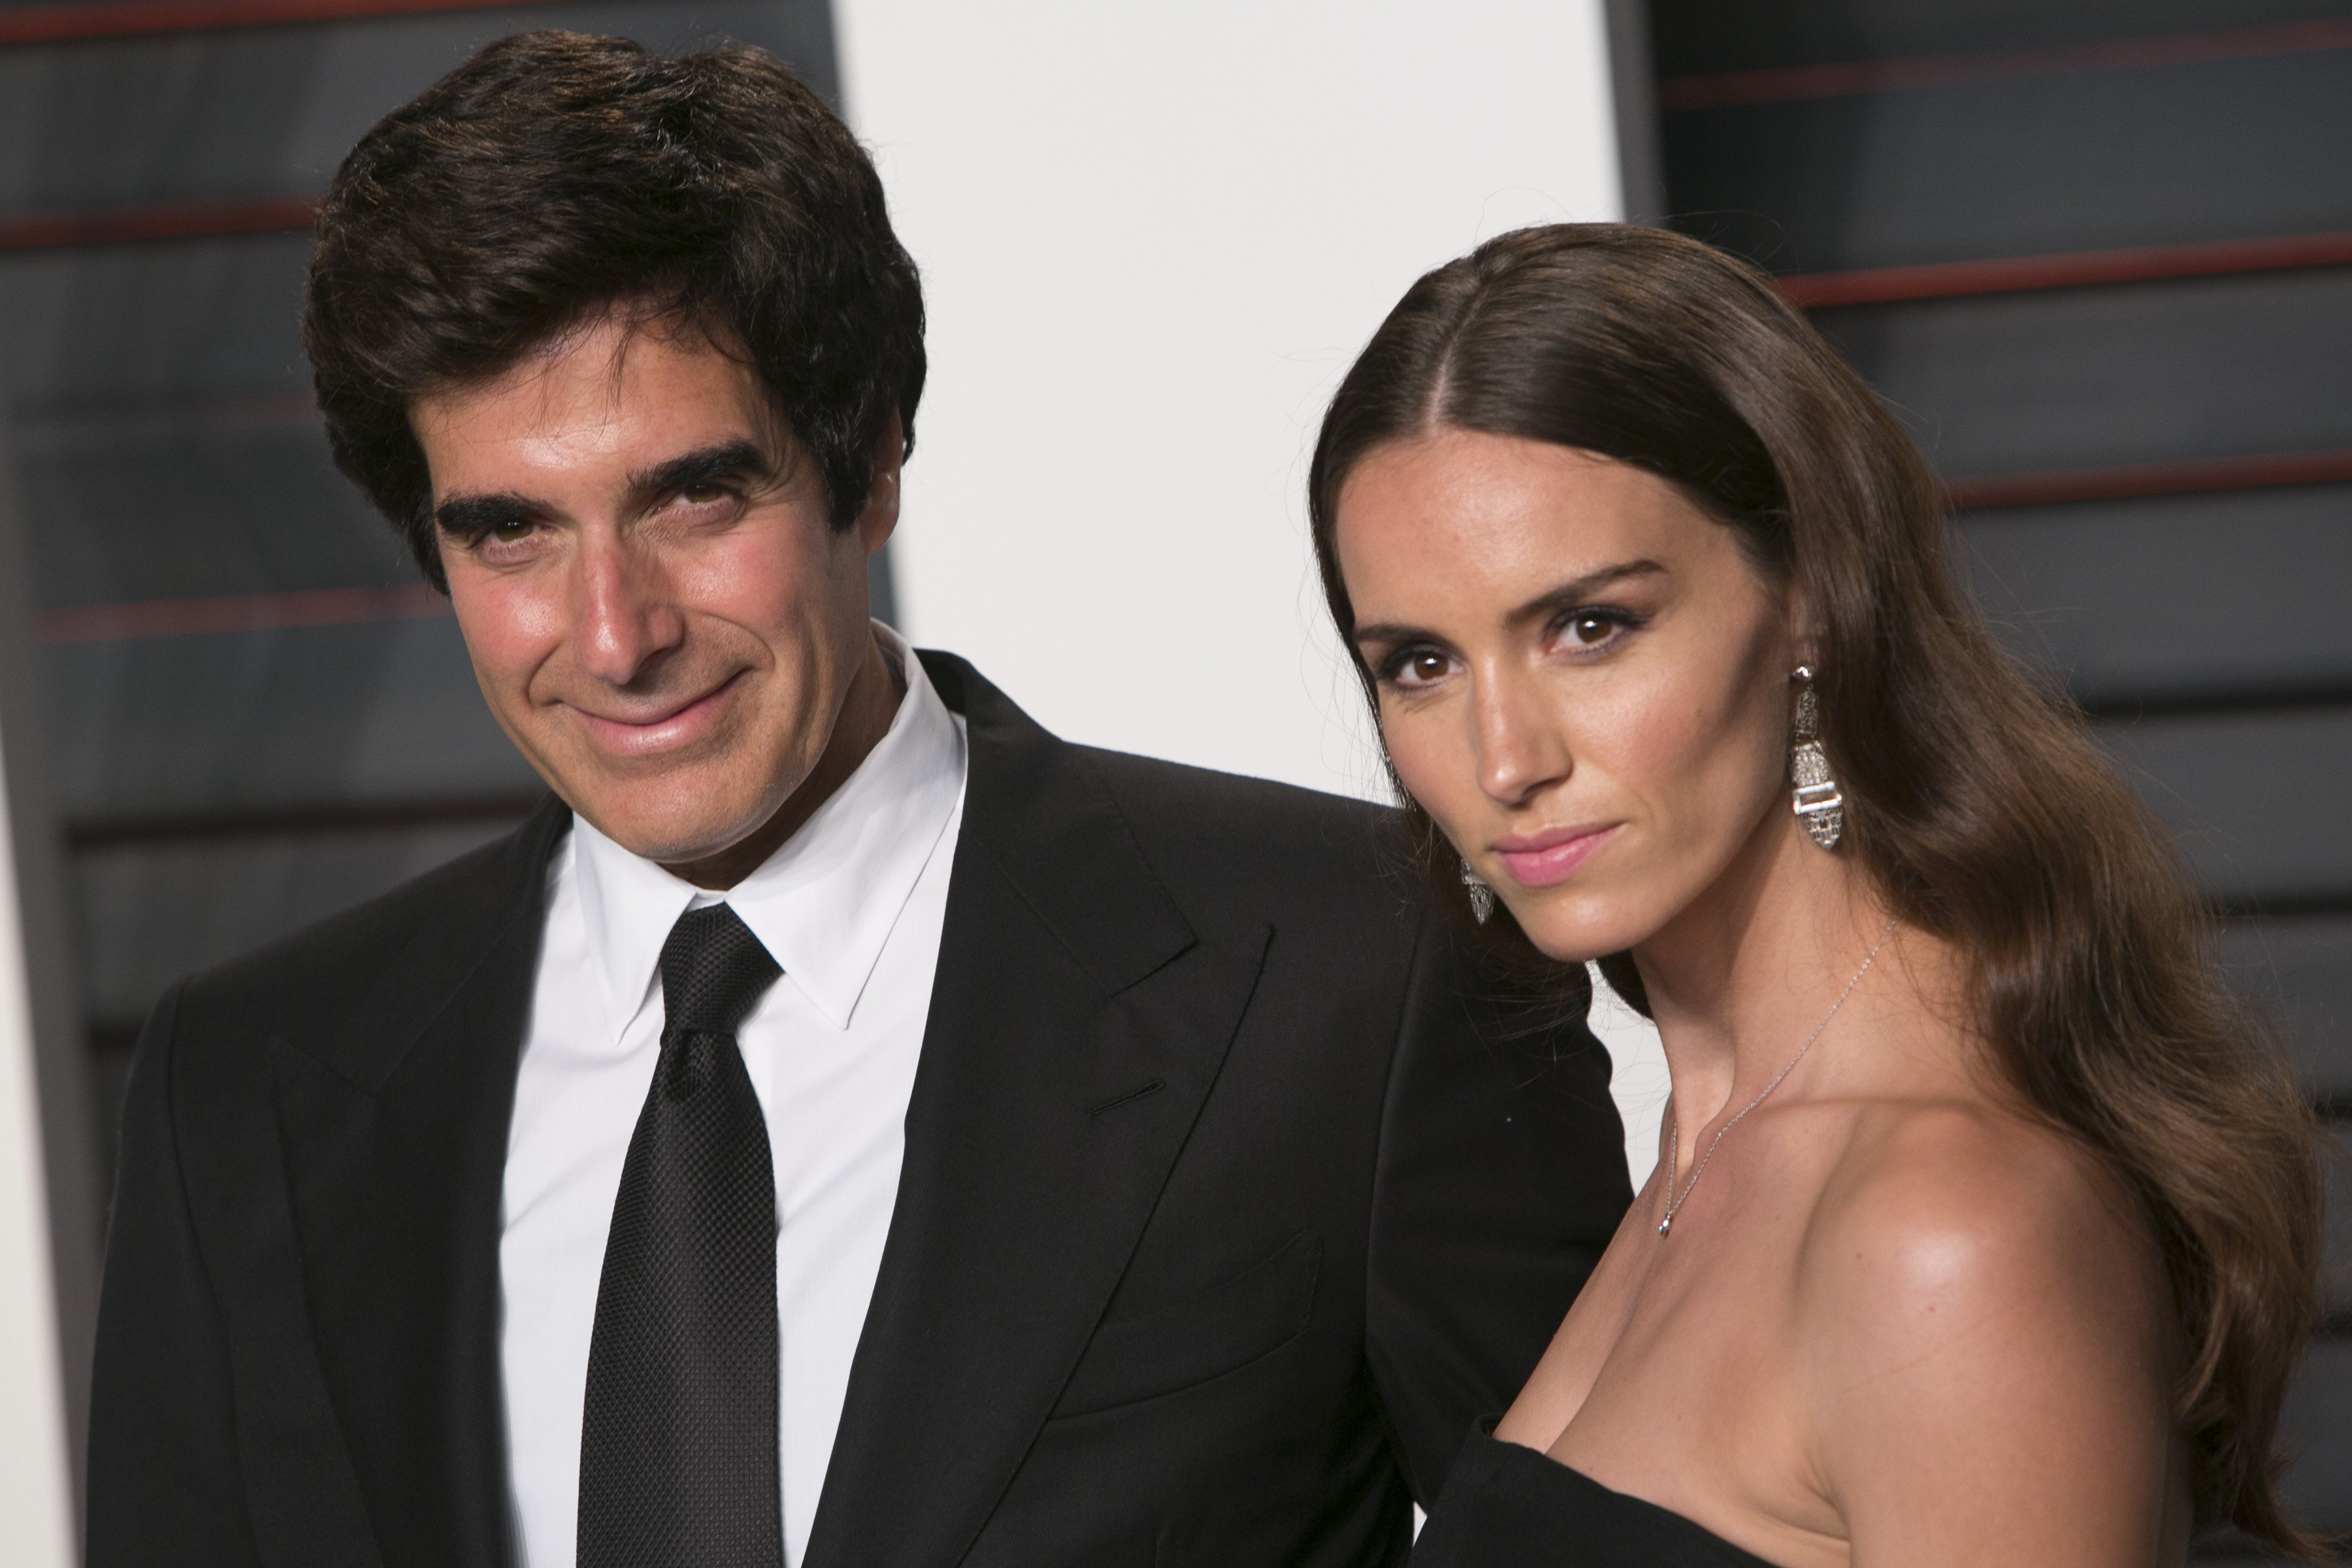 David Copperfield and Chloe Gosselin pose as they arrive at the 2016 Vanity Fair Oscar Party in Beverly Hills, California, on February 28, 2016. | Source: Getty Images